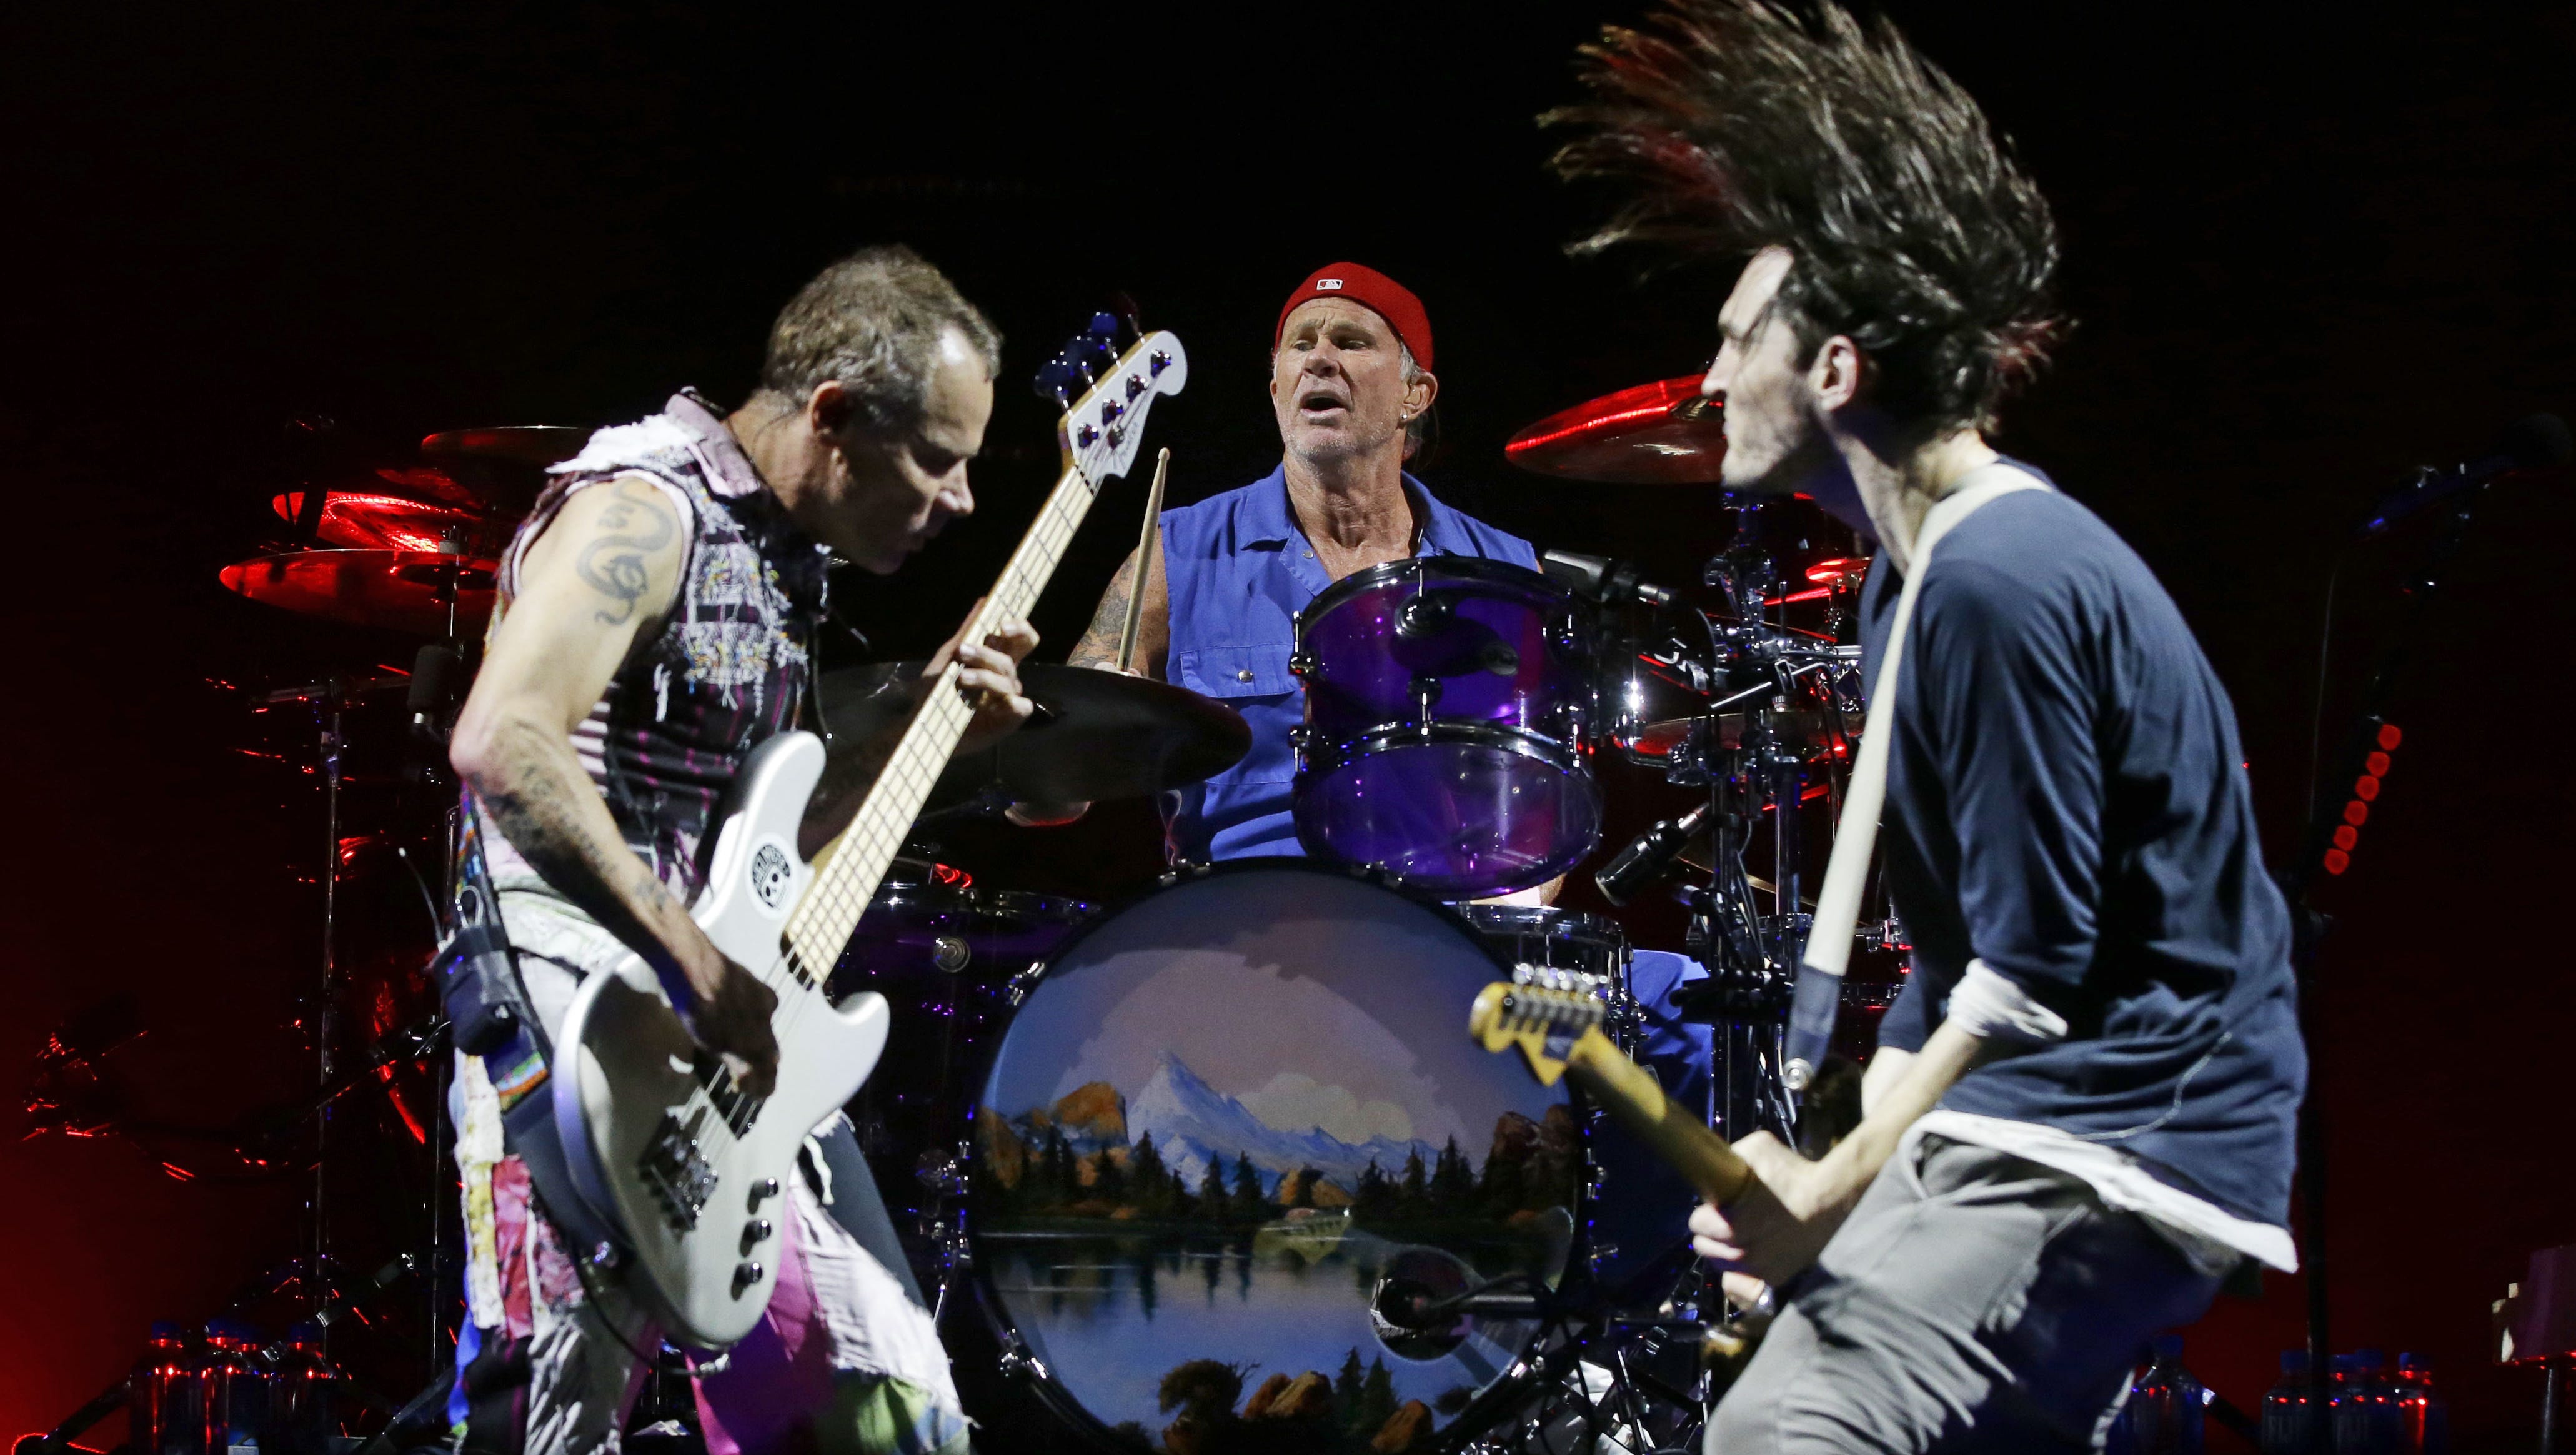 Red Hot Chili Peppers give it away high-energy concert in Glendale